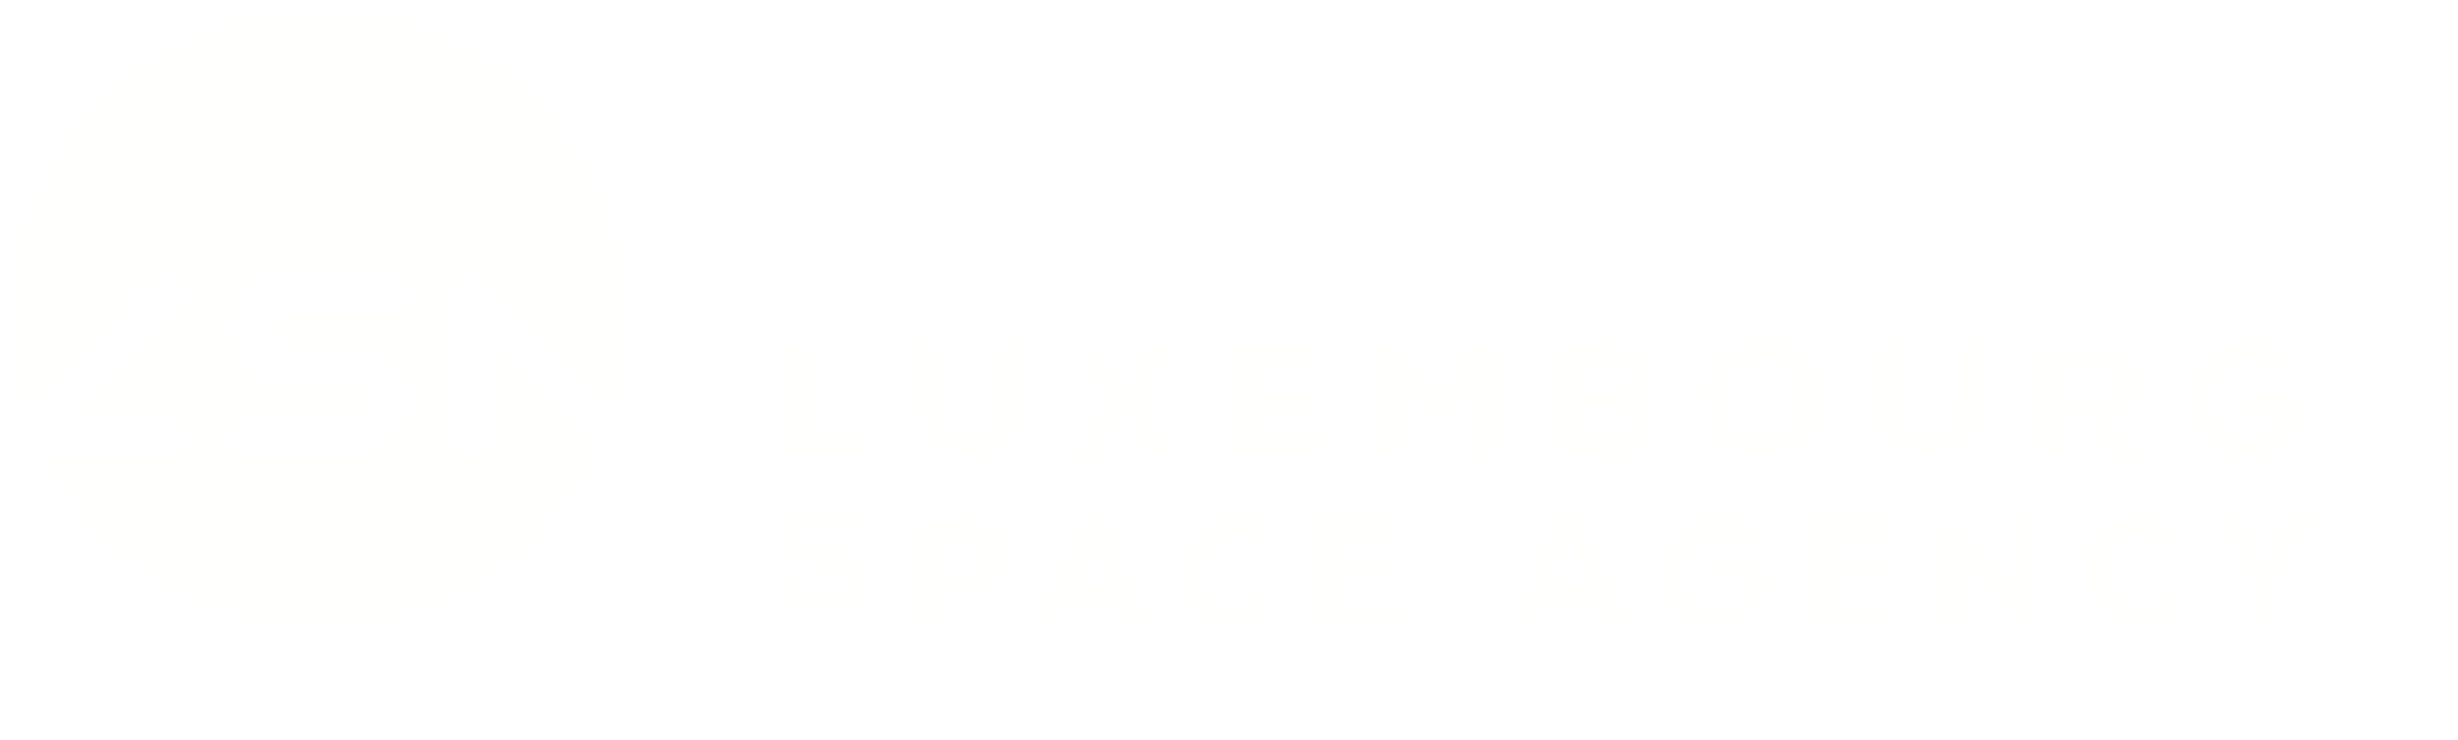 Luxembourg Space Agency